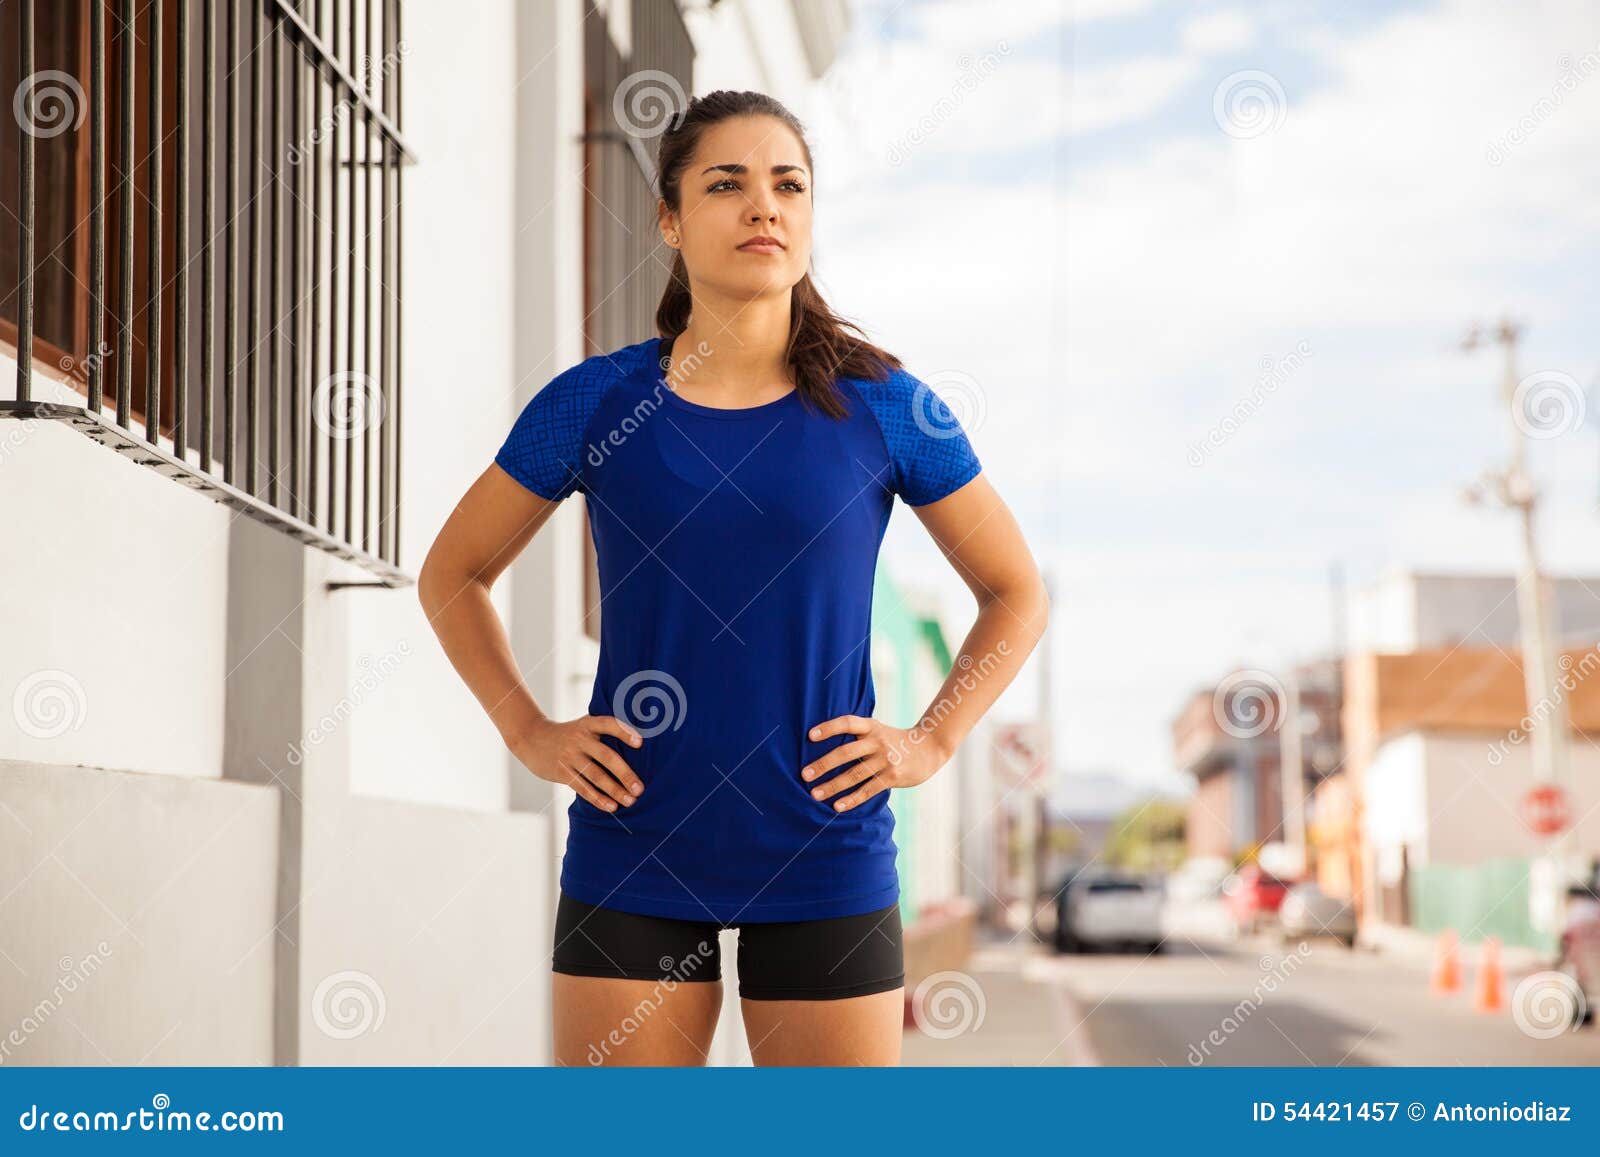 Female athlete working out stock image. Image of active - 54421457